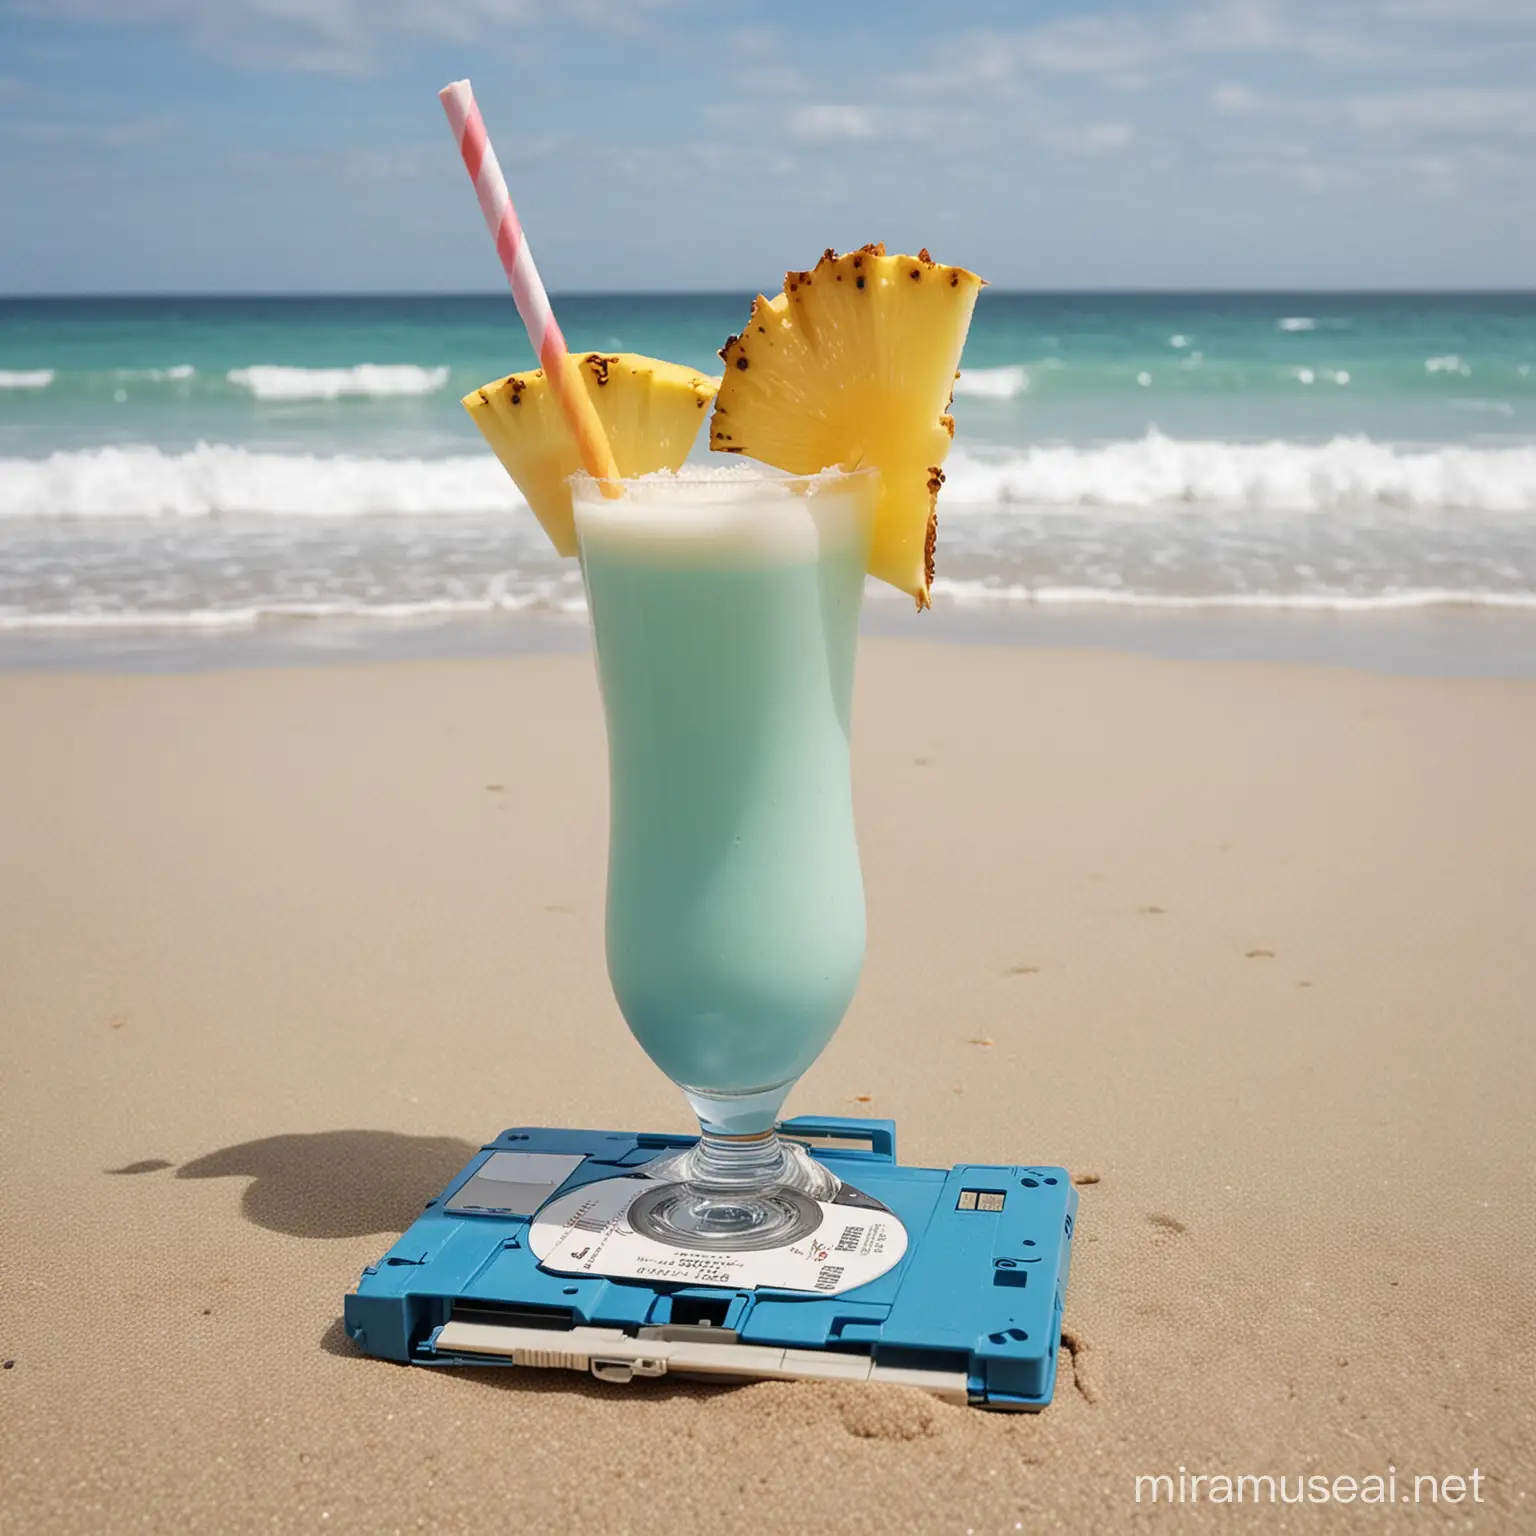 Beach Relaxation with Vintage Tech and Tropical Vibes